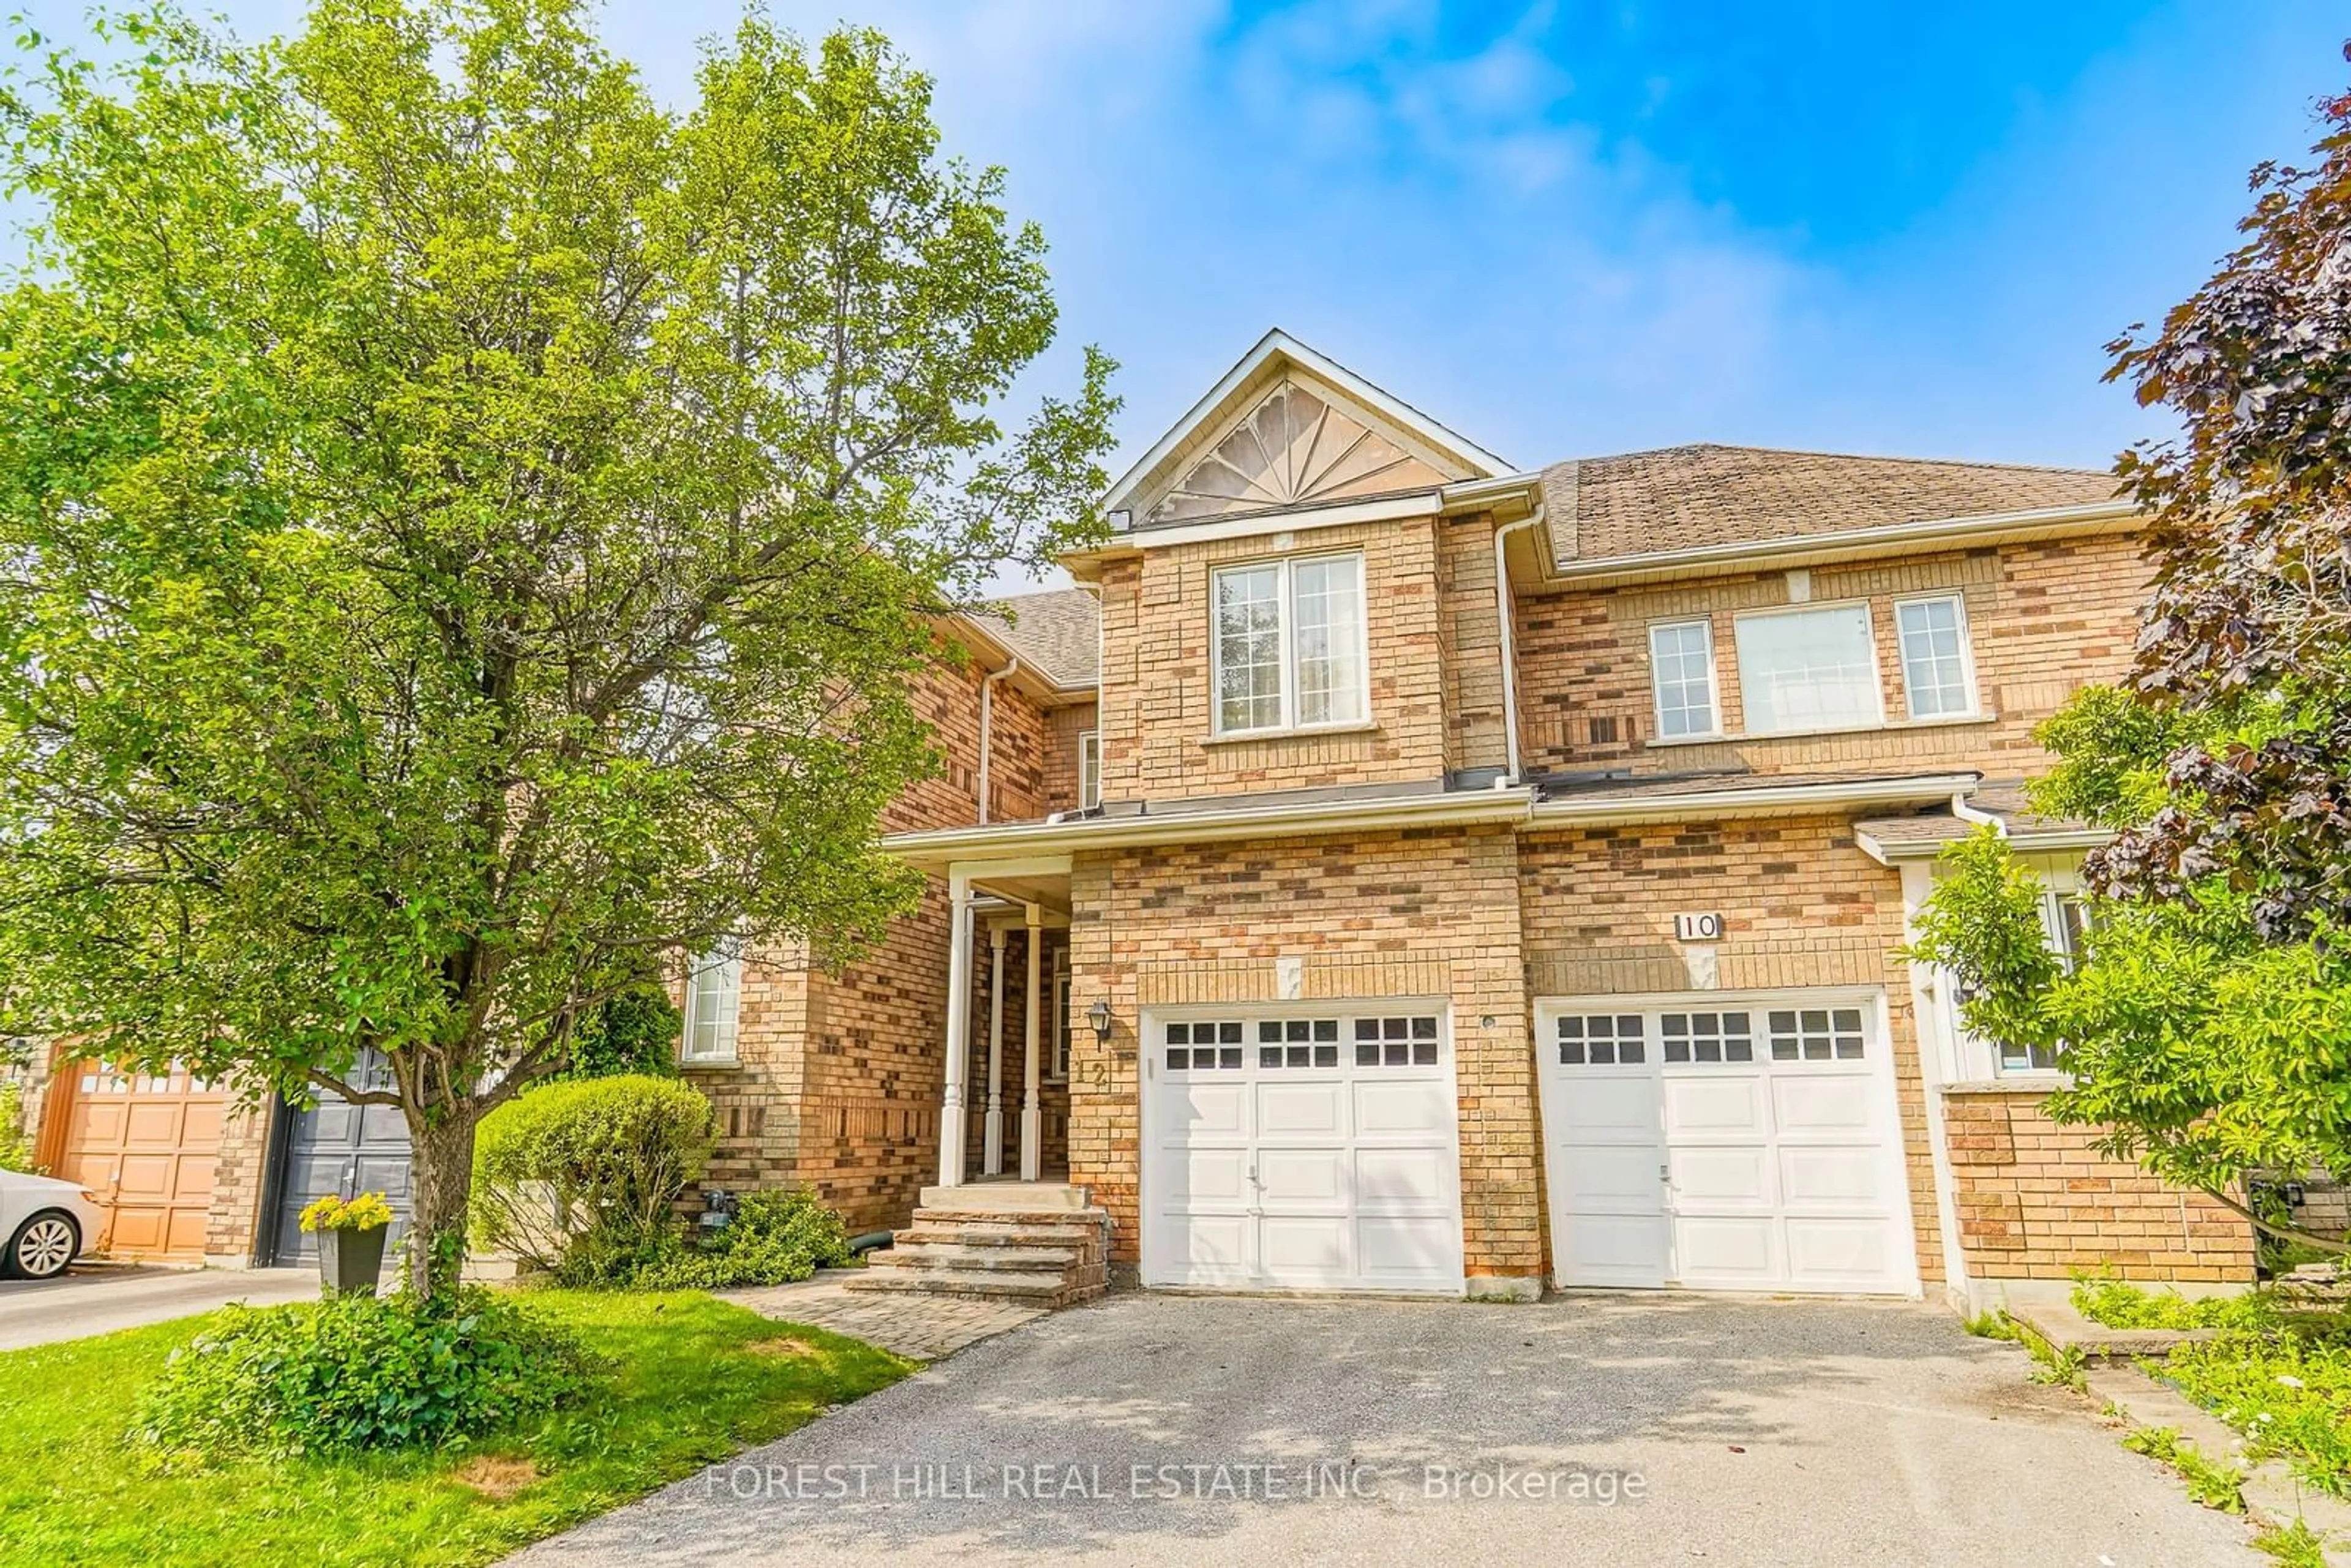 Home with brick exterior material for 12 Ebony Gate, Richmond Hill Ontario L4S 2C1